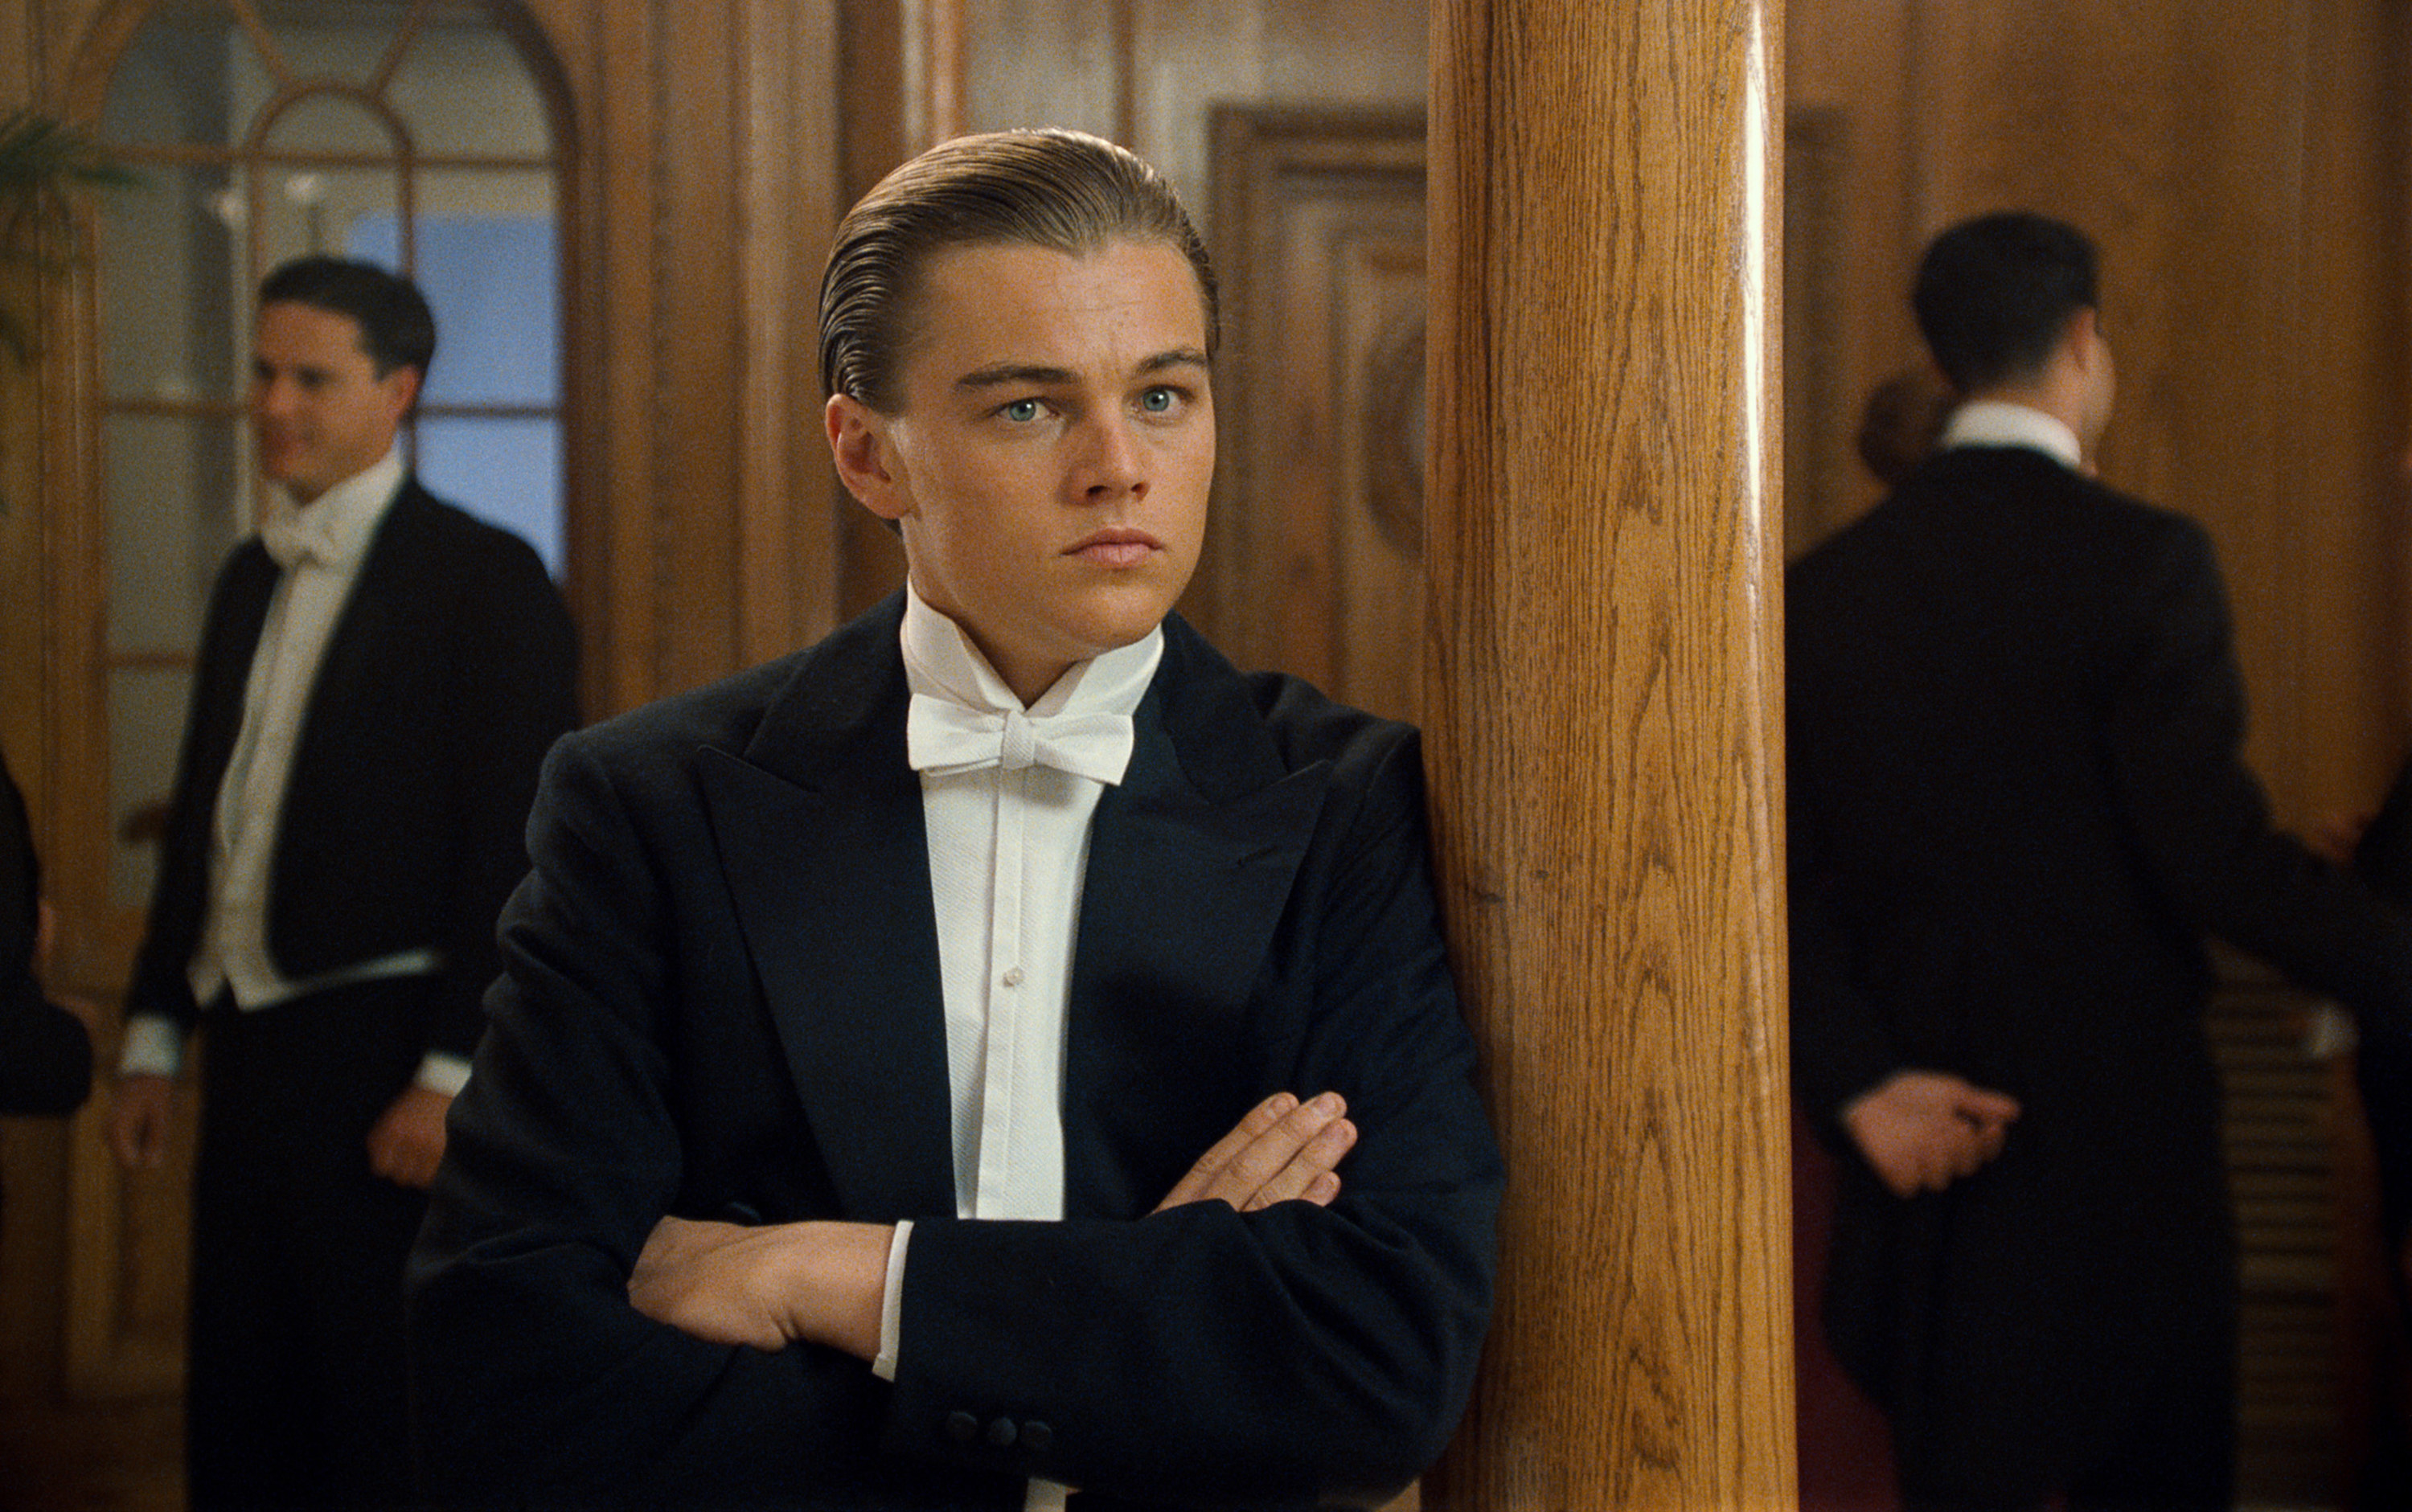 Leonardo in the film with his arms crossed and wearing a bow tie